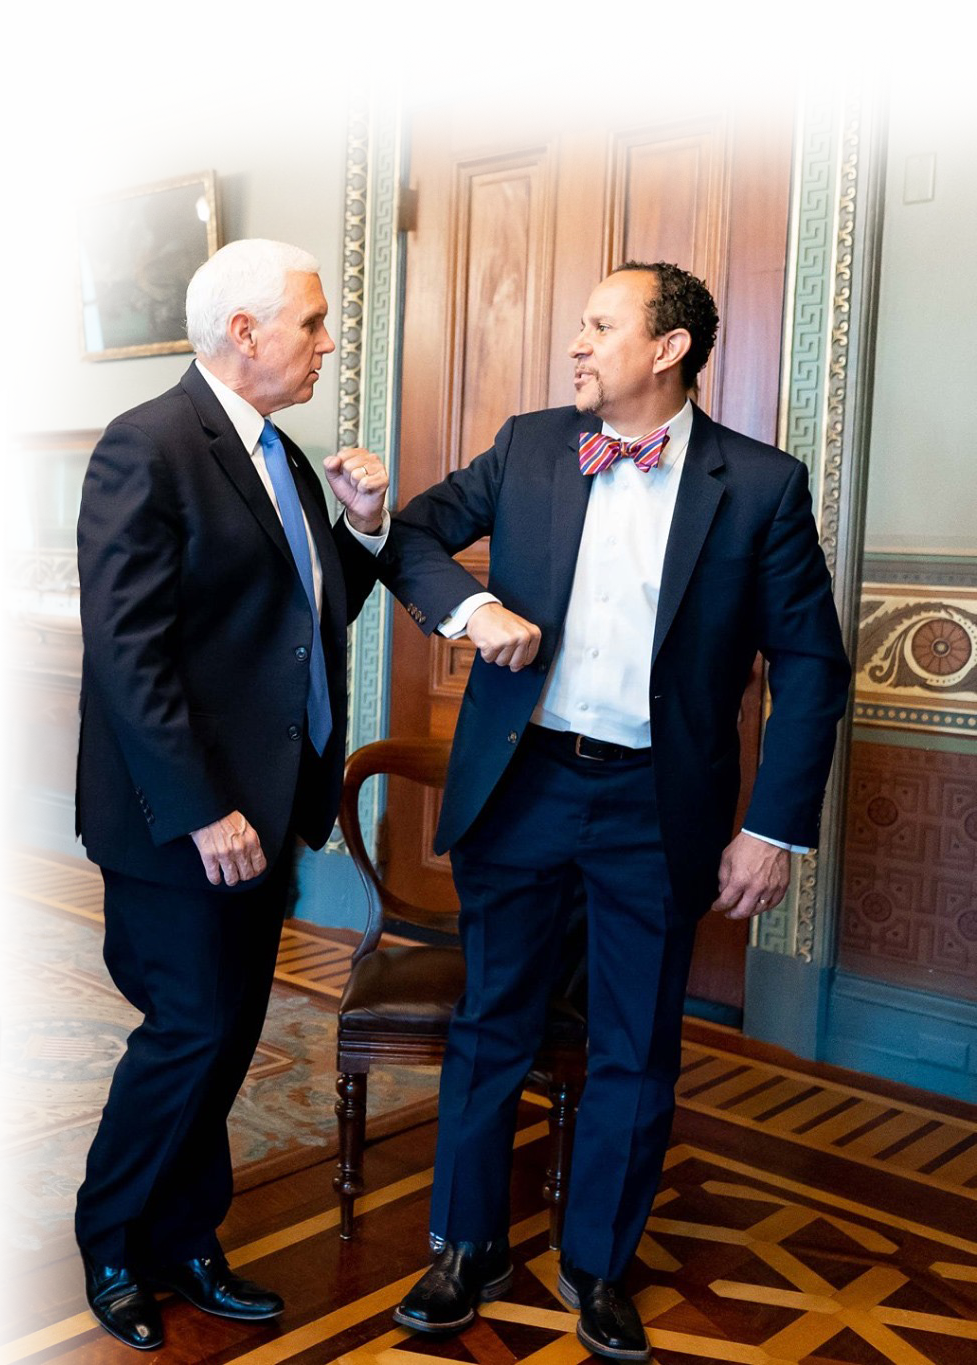 Dean Nelson with vice president Pence